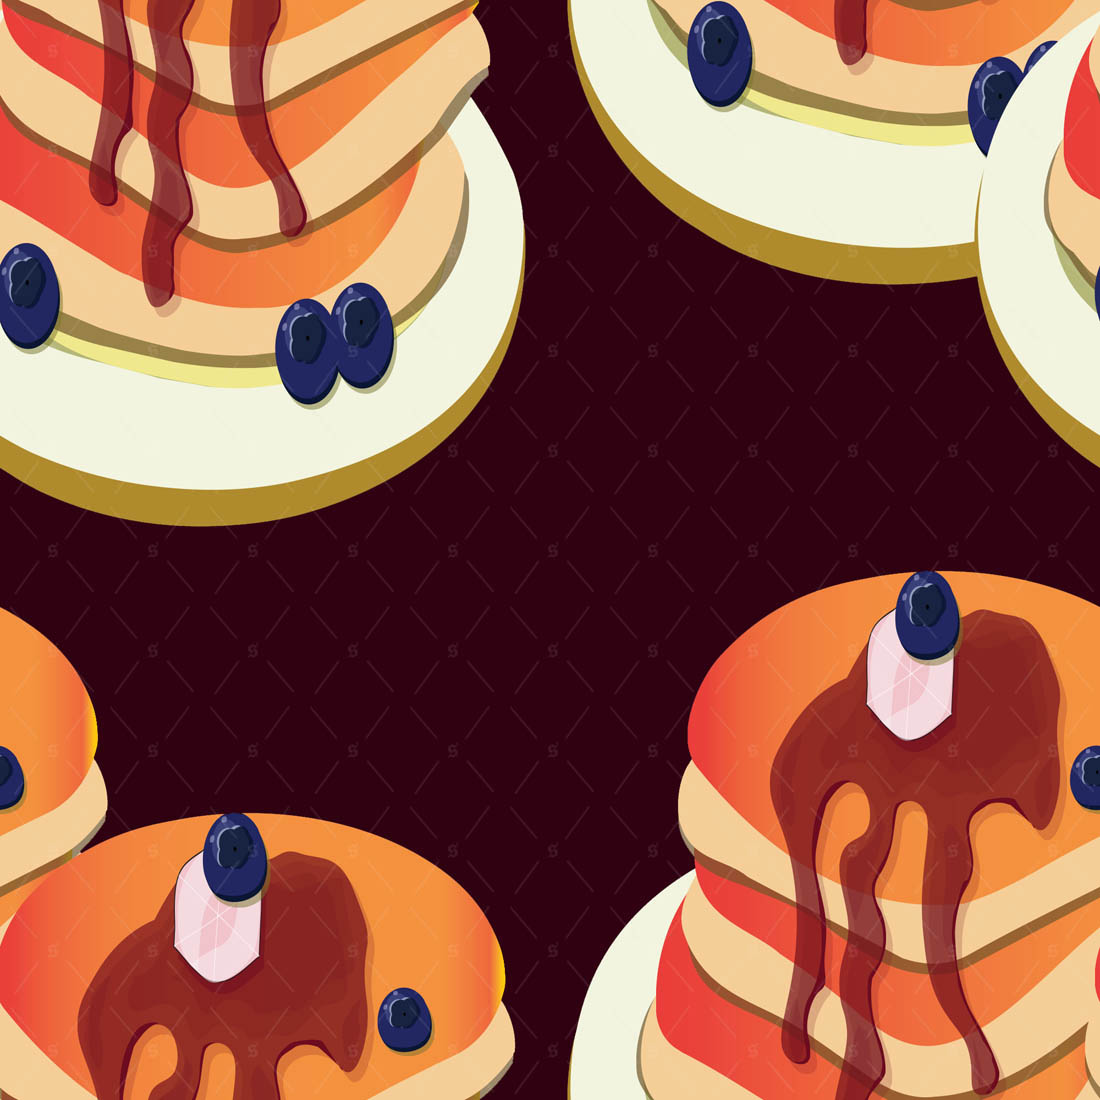 Pancake Buffet Bar collection cover image.